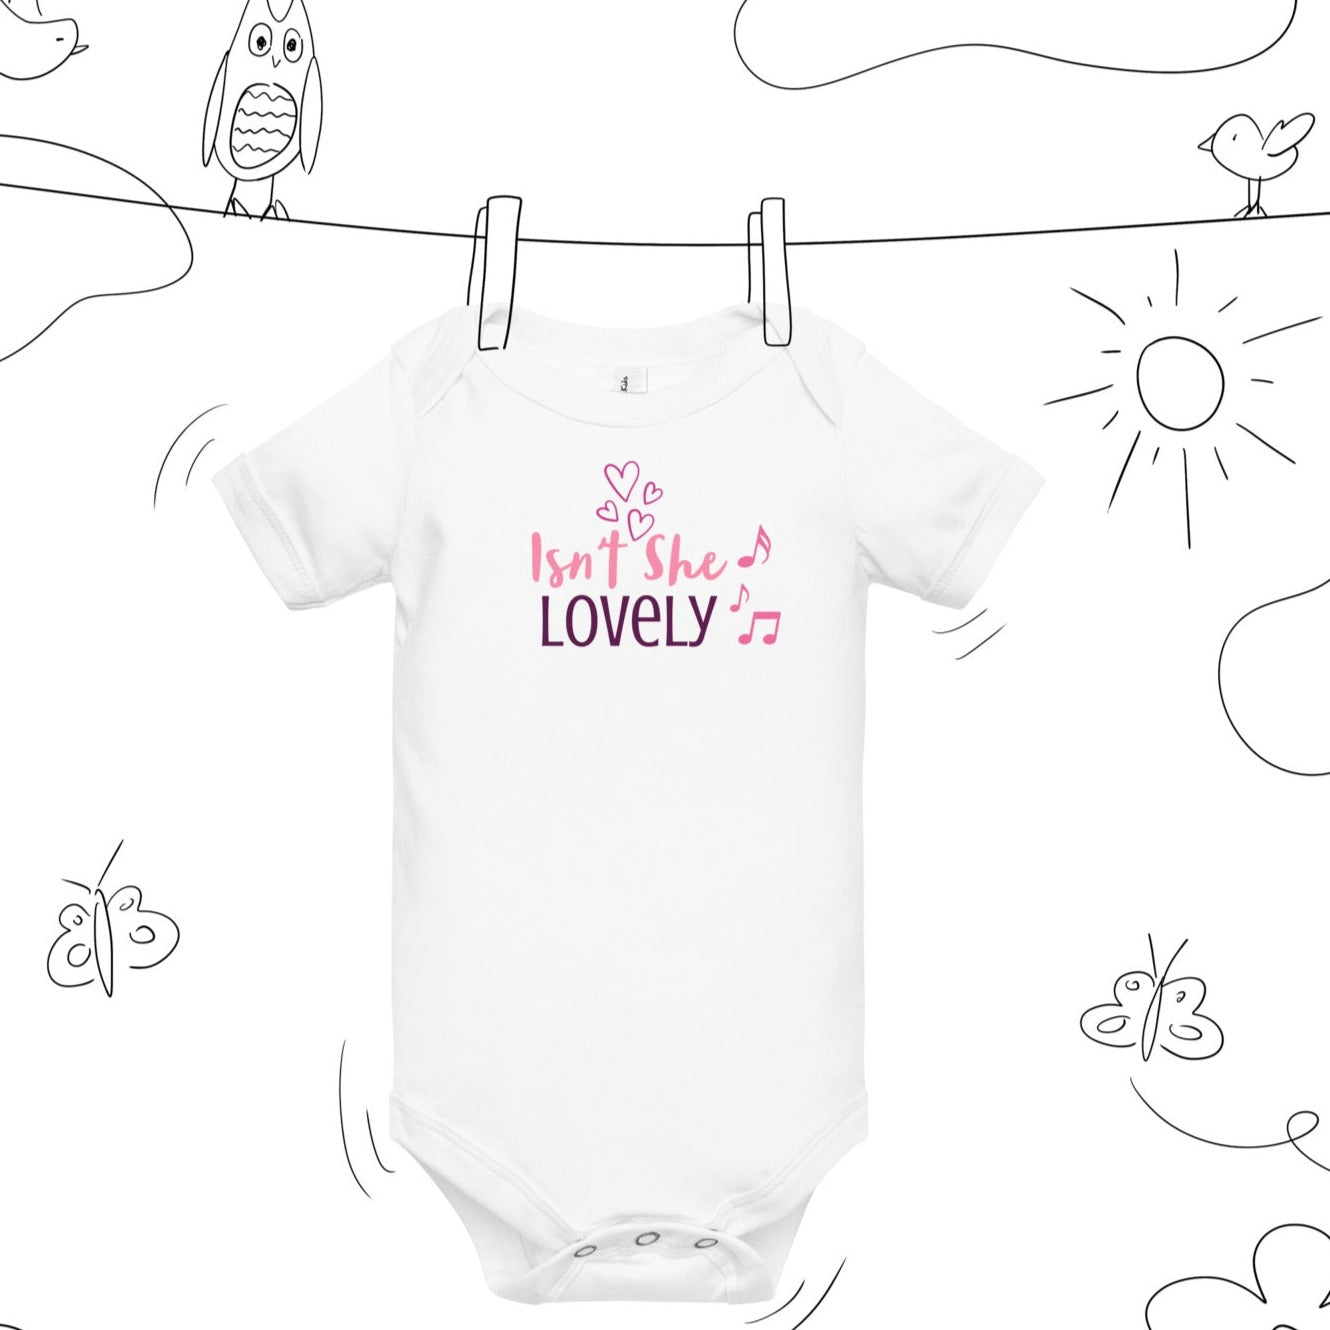 Isn't She Lovely Baby Onesie - On the Go with Princess O